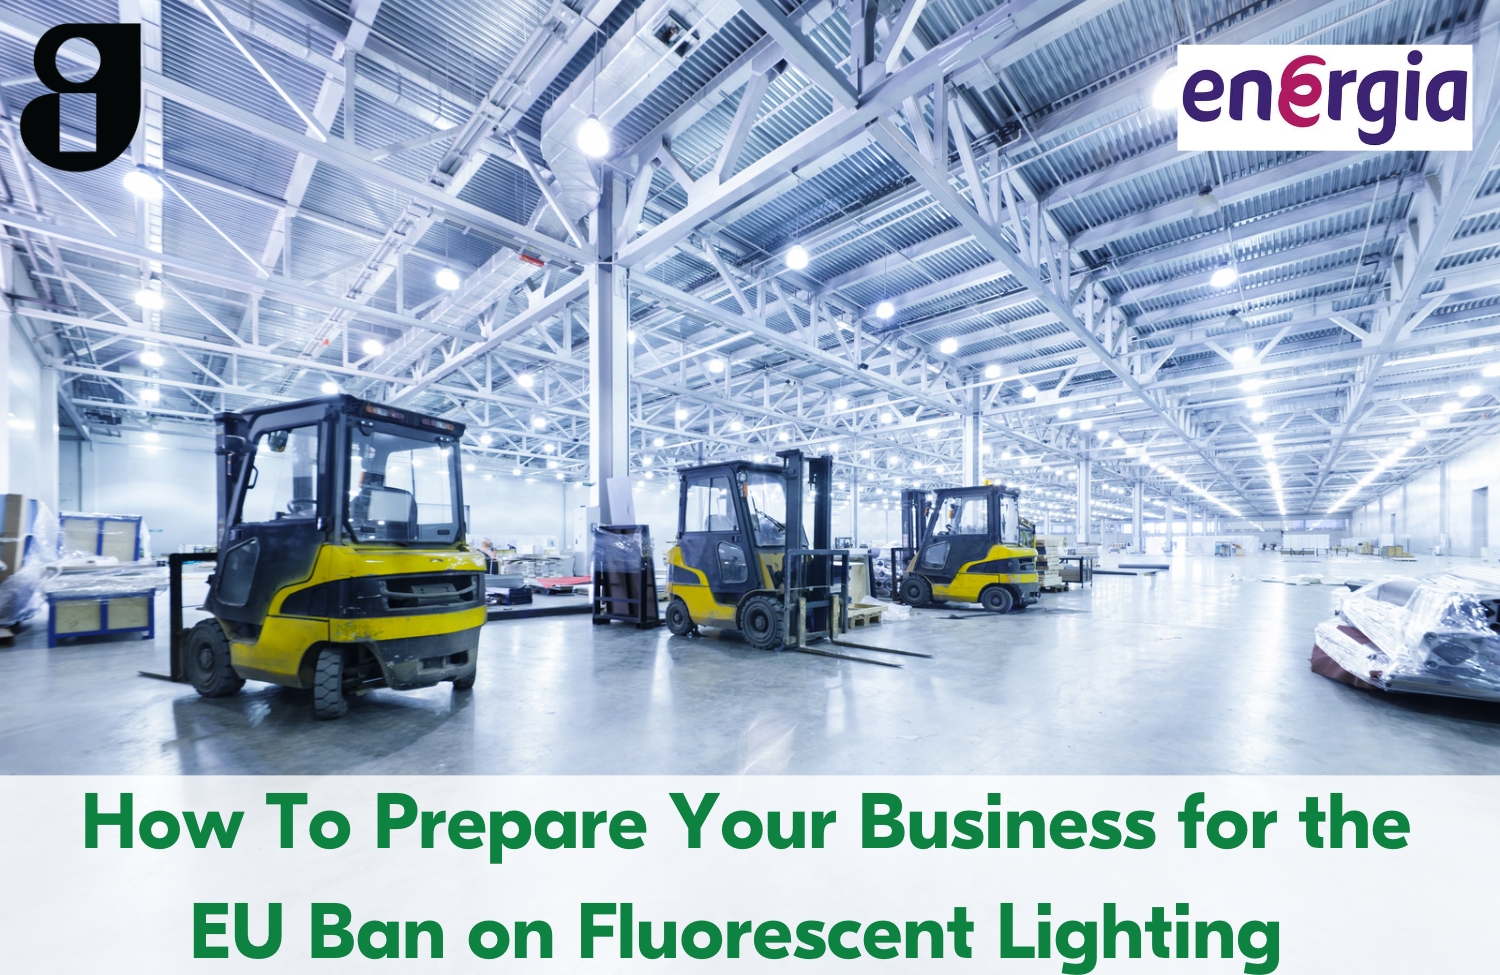 How To Prepare Your Business for the EU Ban on Fluorescent Lighting